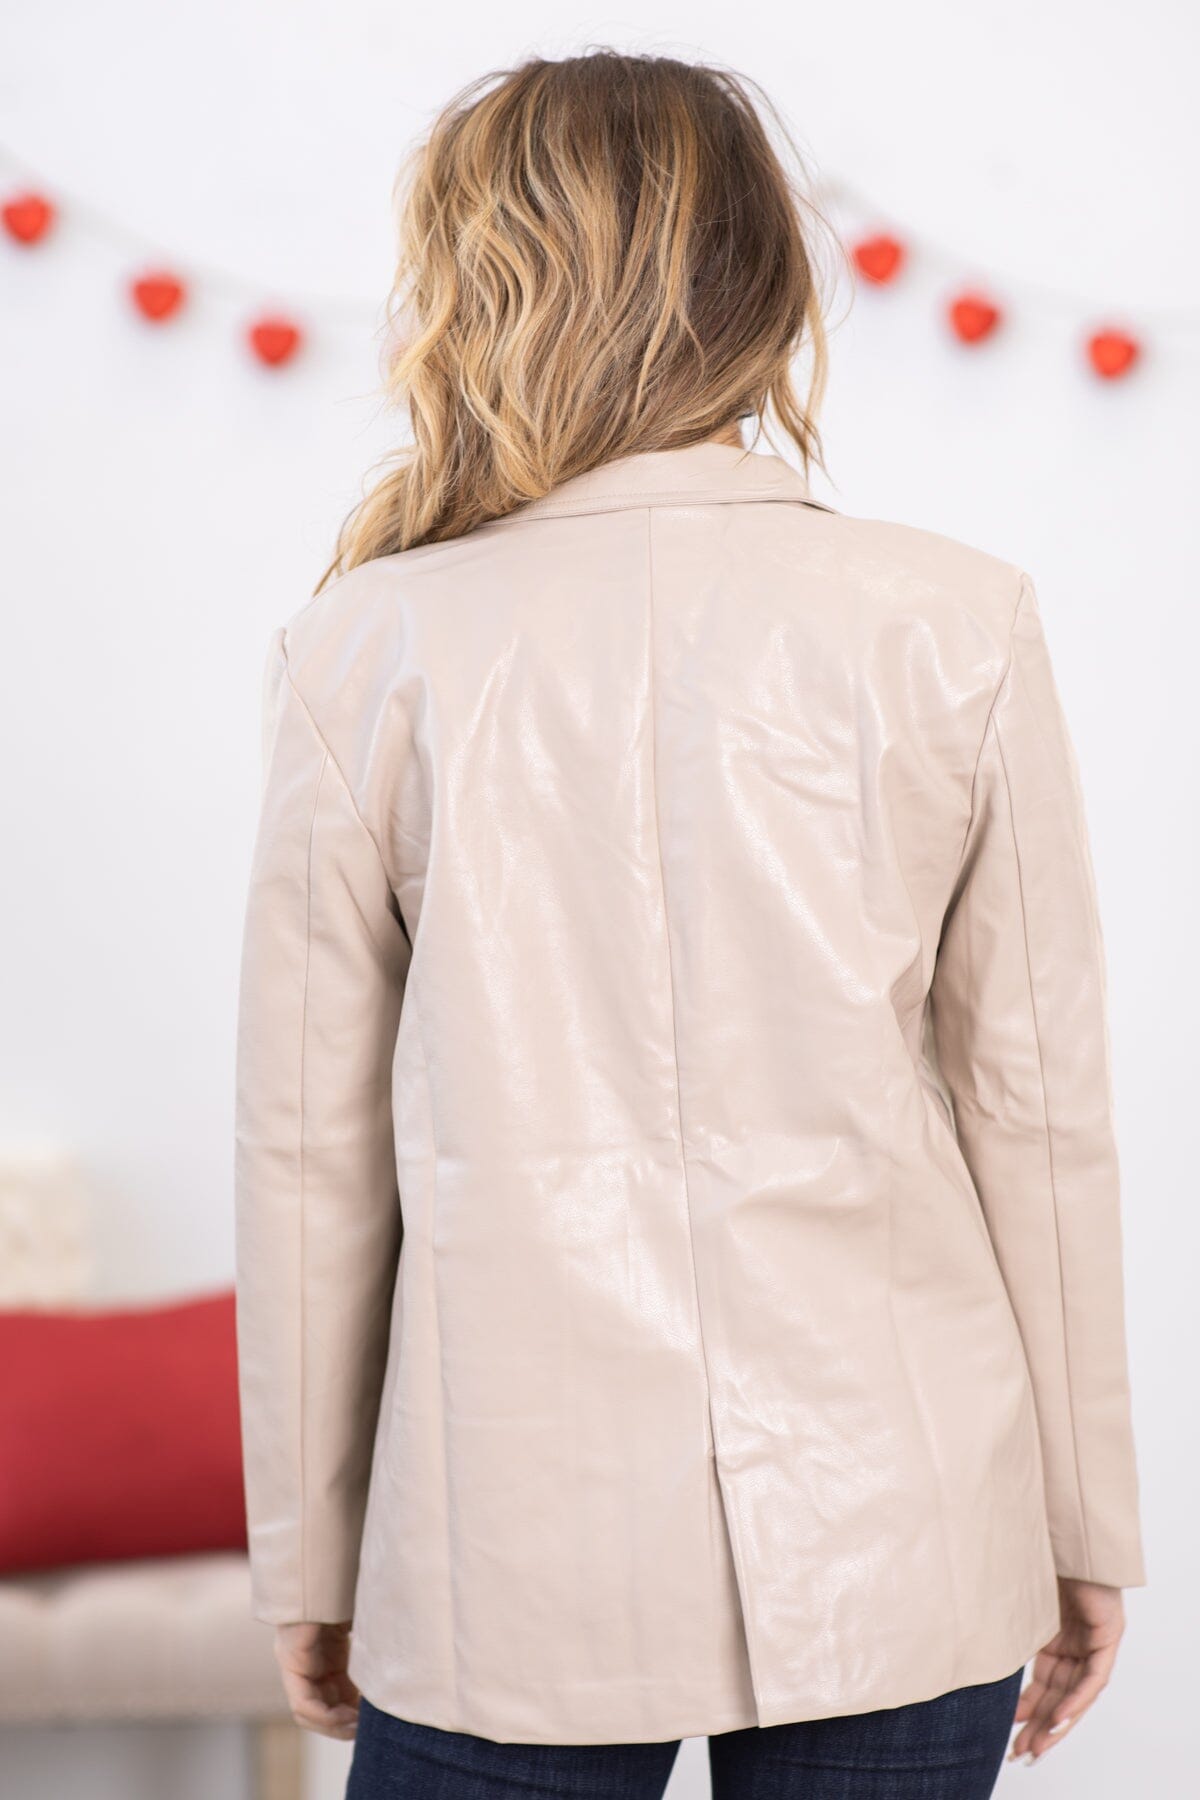 Beige Faux Leather Blazer - Filly Flair